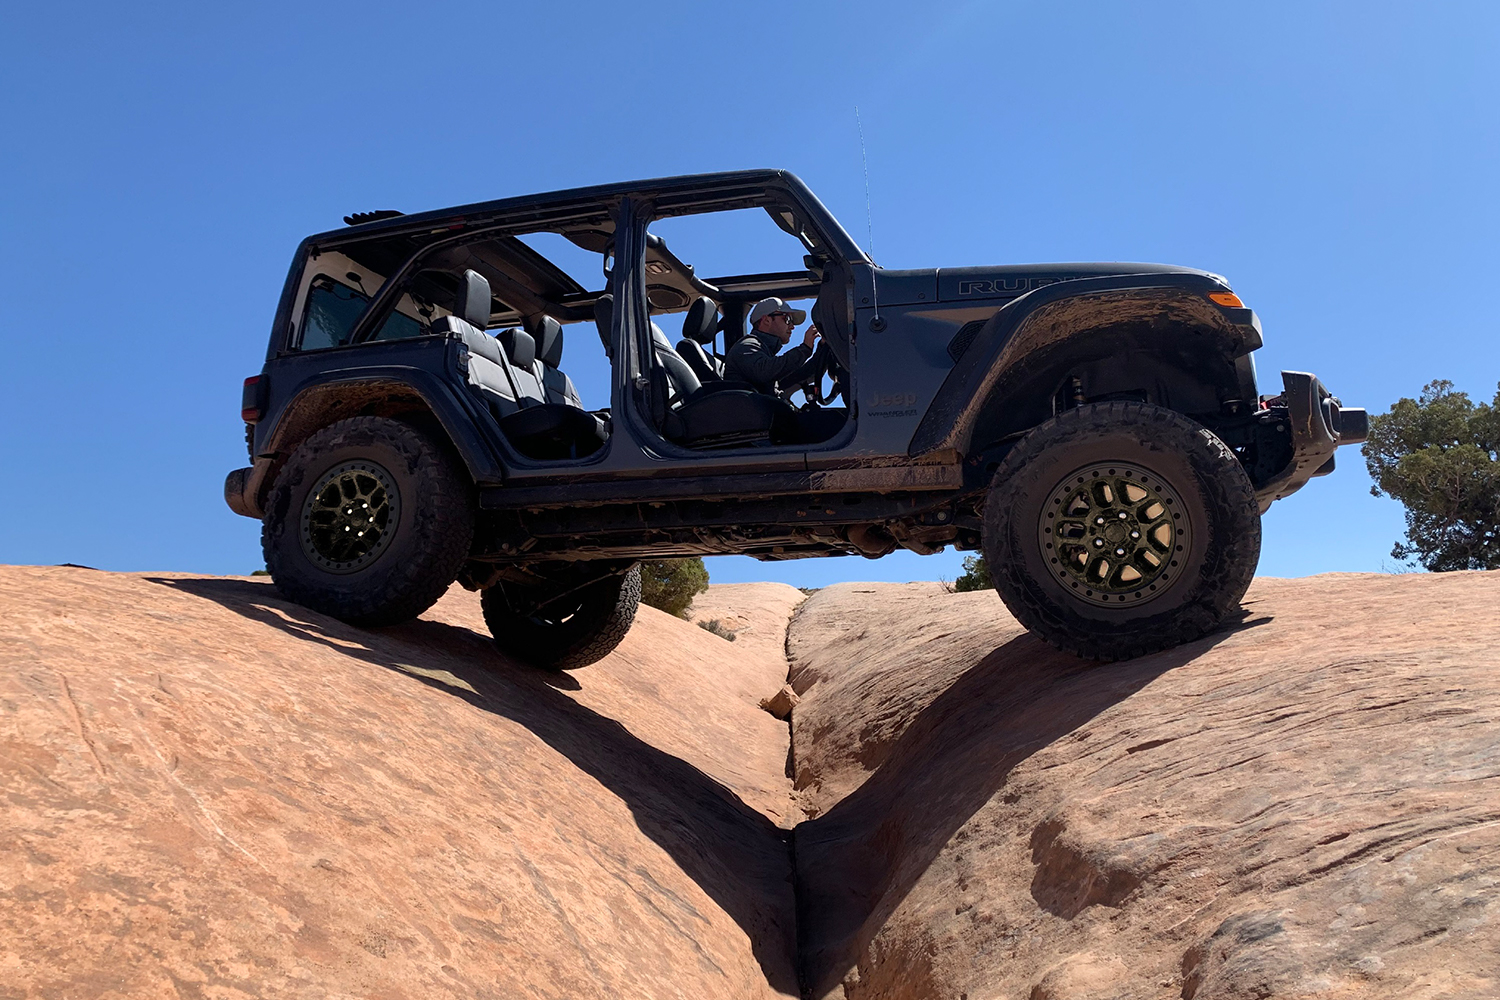 A black Jeep Wrangler with no doors and the new Xtreme Recon Package. The off-road edition is meant to compete with the Ford Bronco.